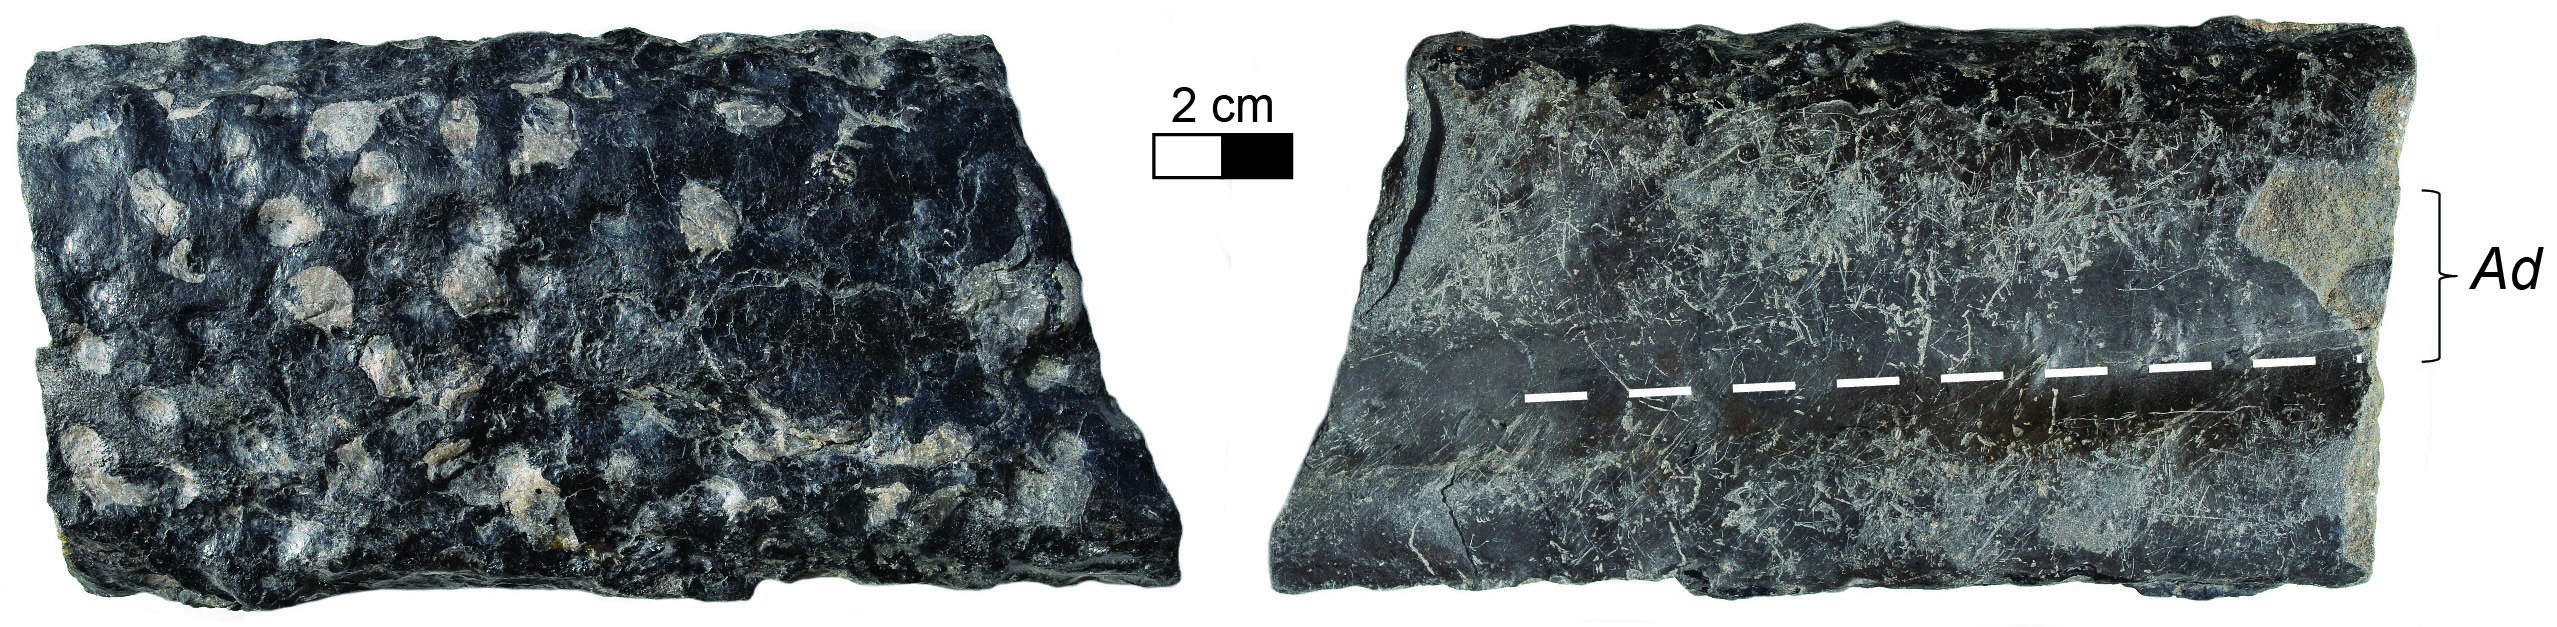 Two sides of a Stigmaria ficoides specimen from eastern Kentucky preserved as a silty shale cast with a coalified outer rim, showing characteristic circular pits where root hairs attached and an axial depression (Ad) on one side. 